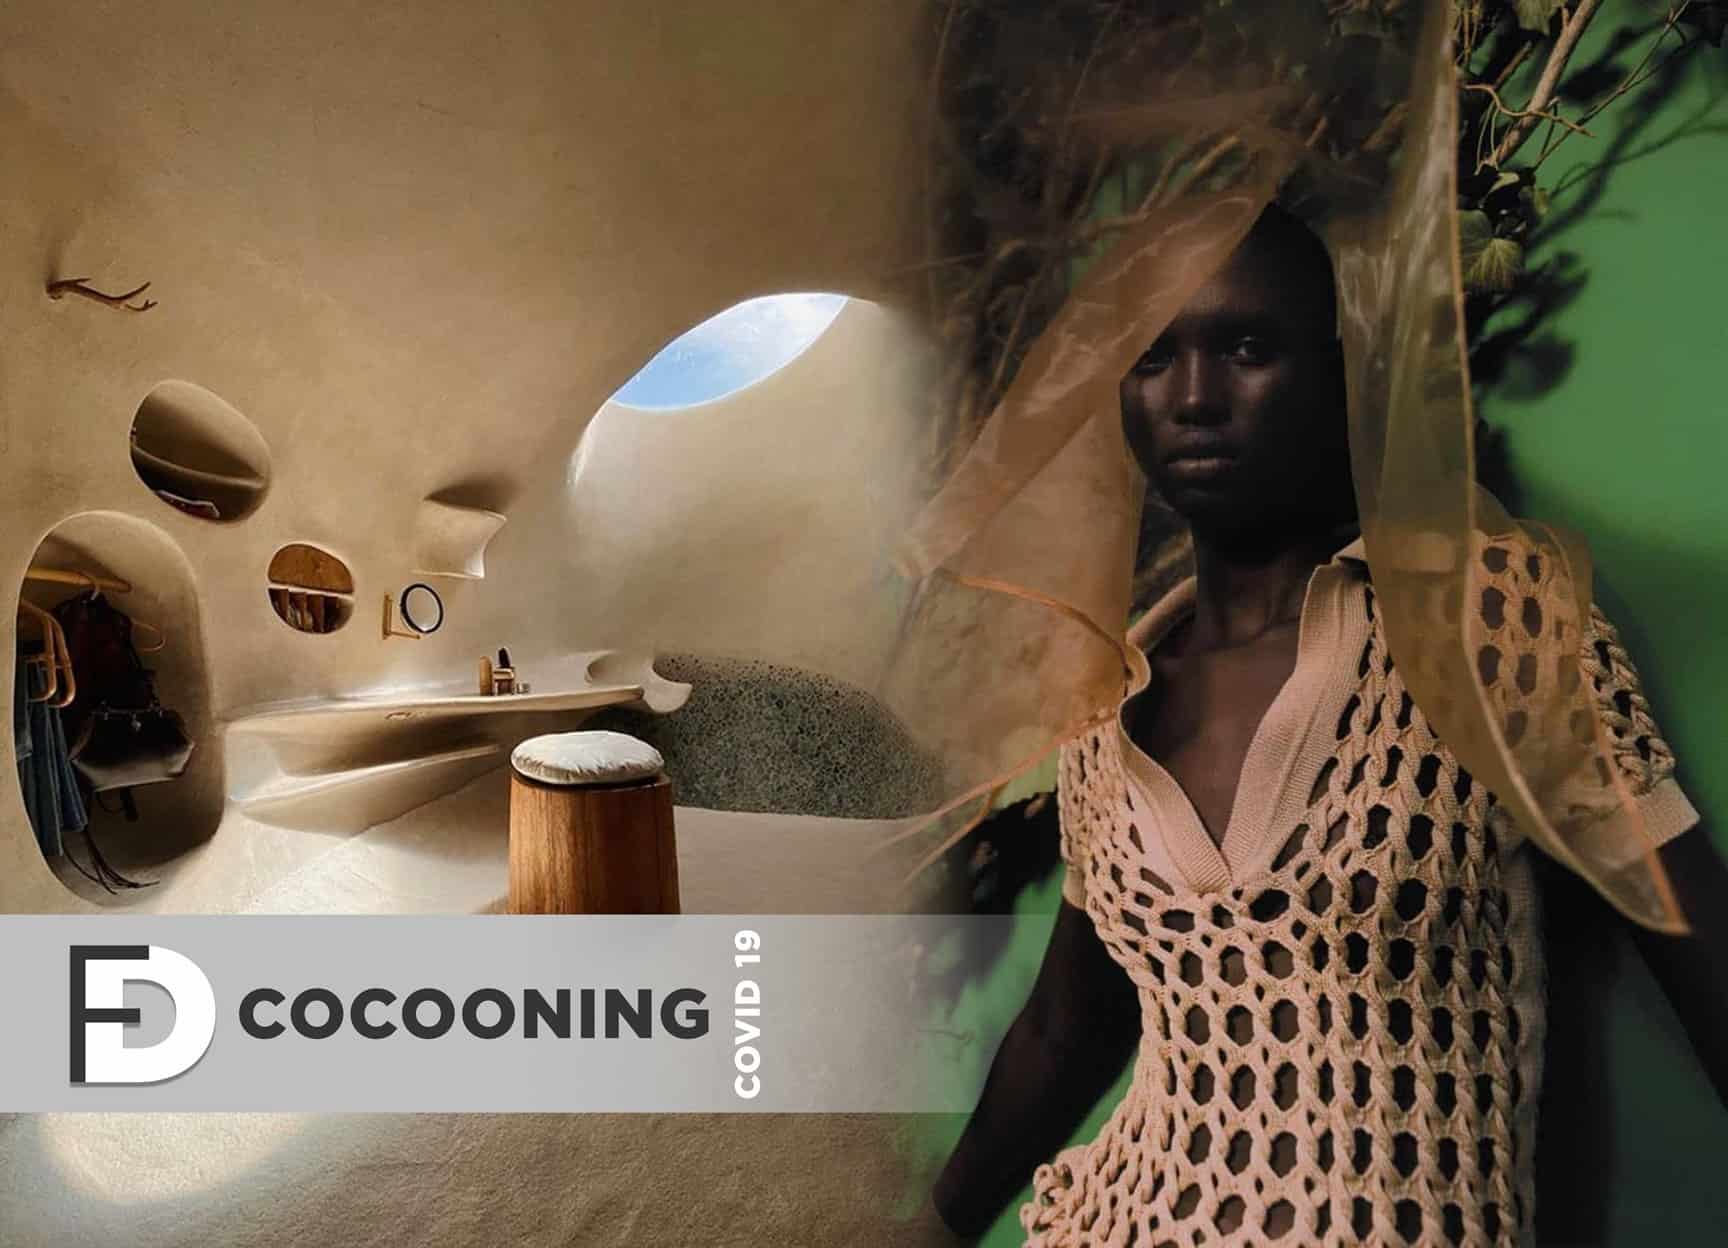 Trends 2021 Cocoon fashion post covid19 1